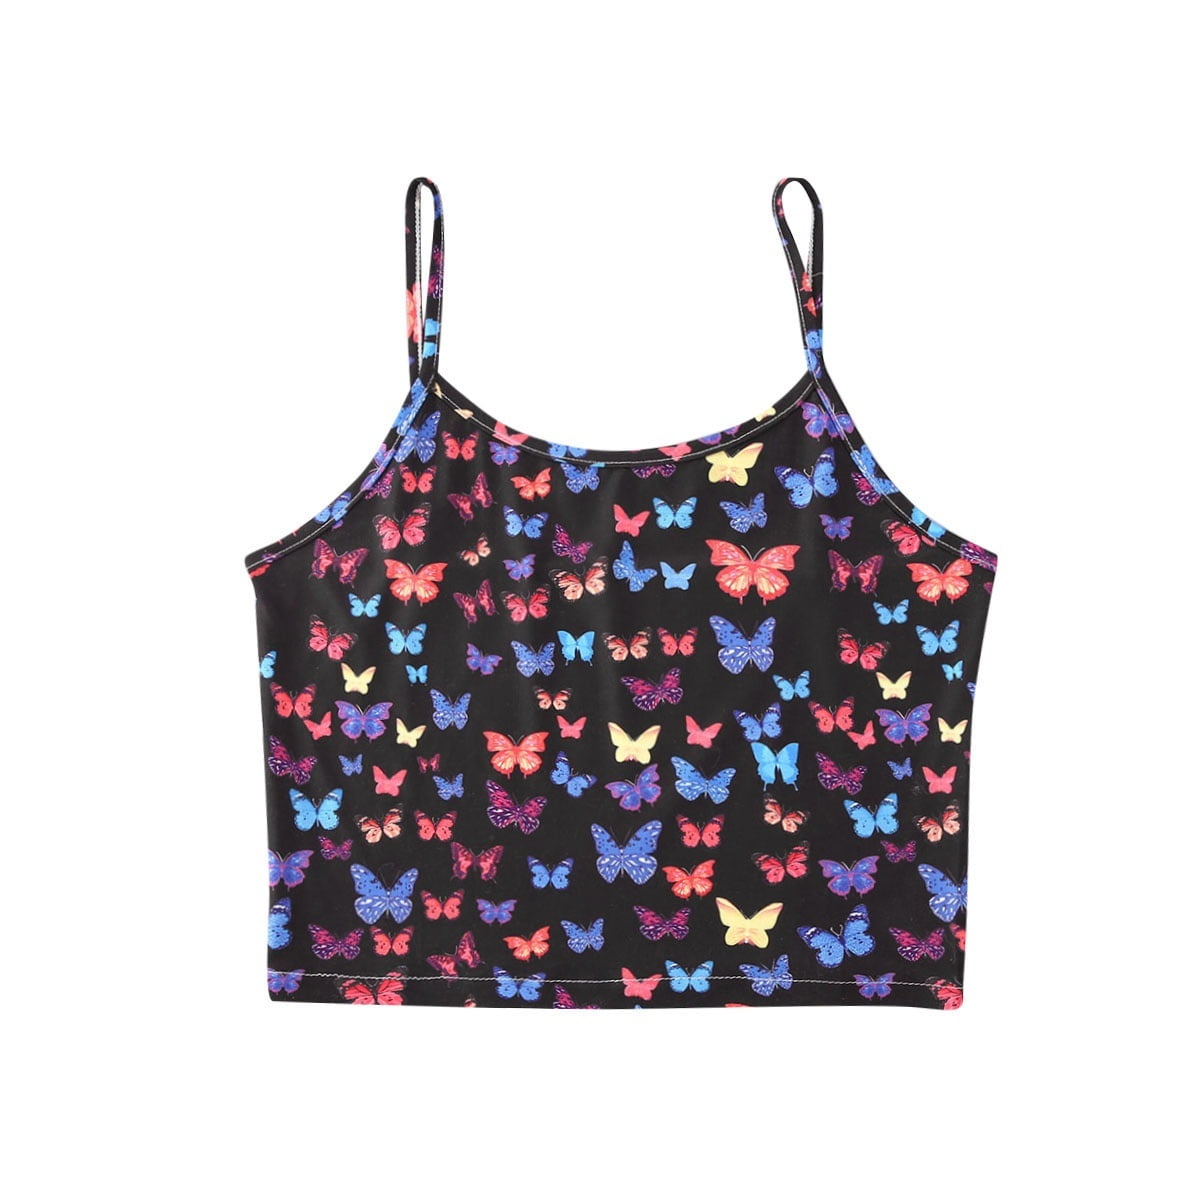 Women's Cute Spaghetti Strap Camisole, Butterfly Print Cropped Cami Top ...